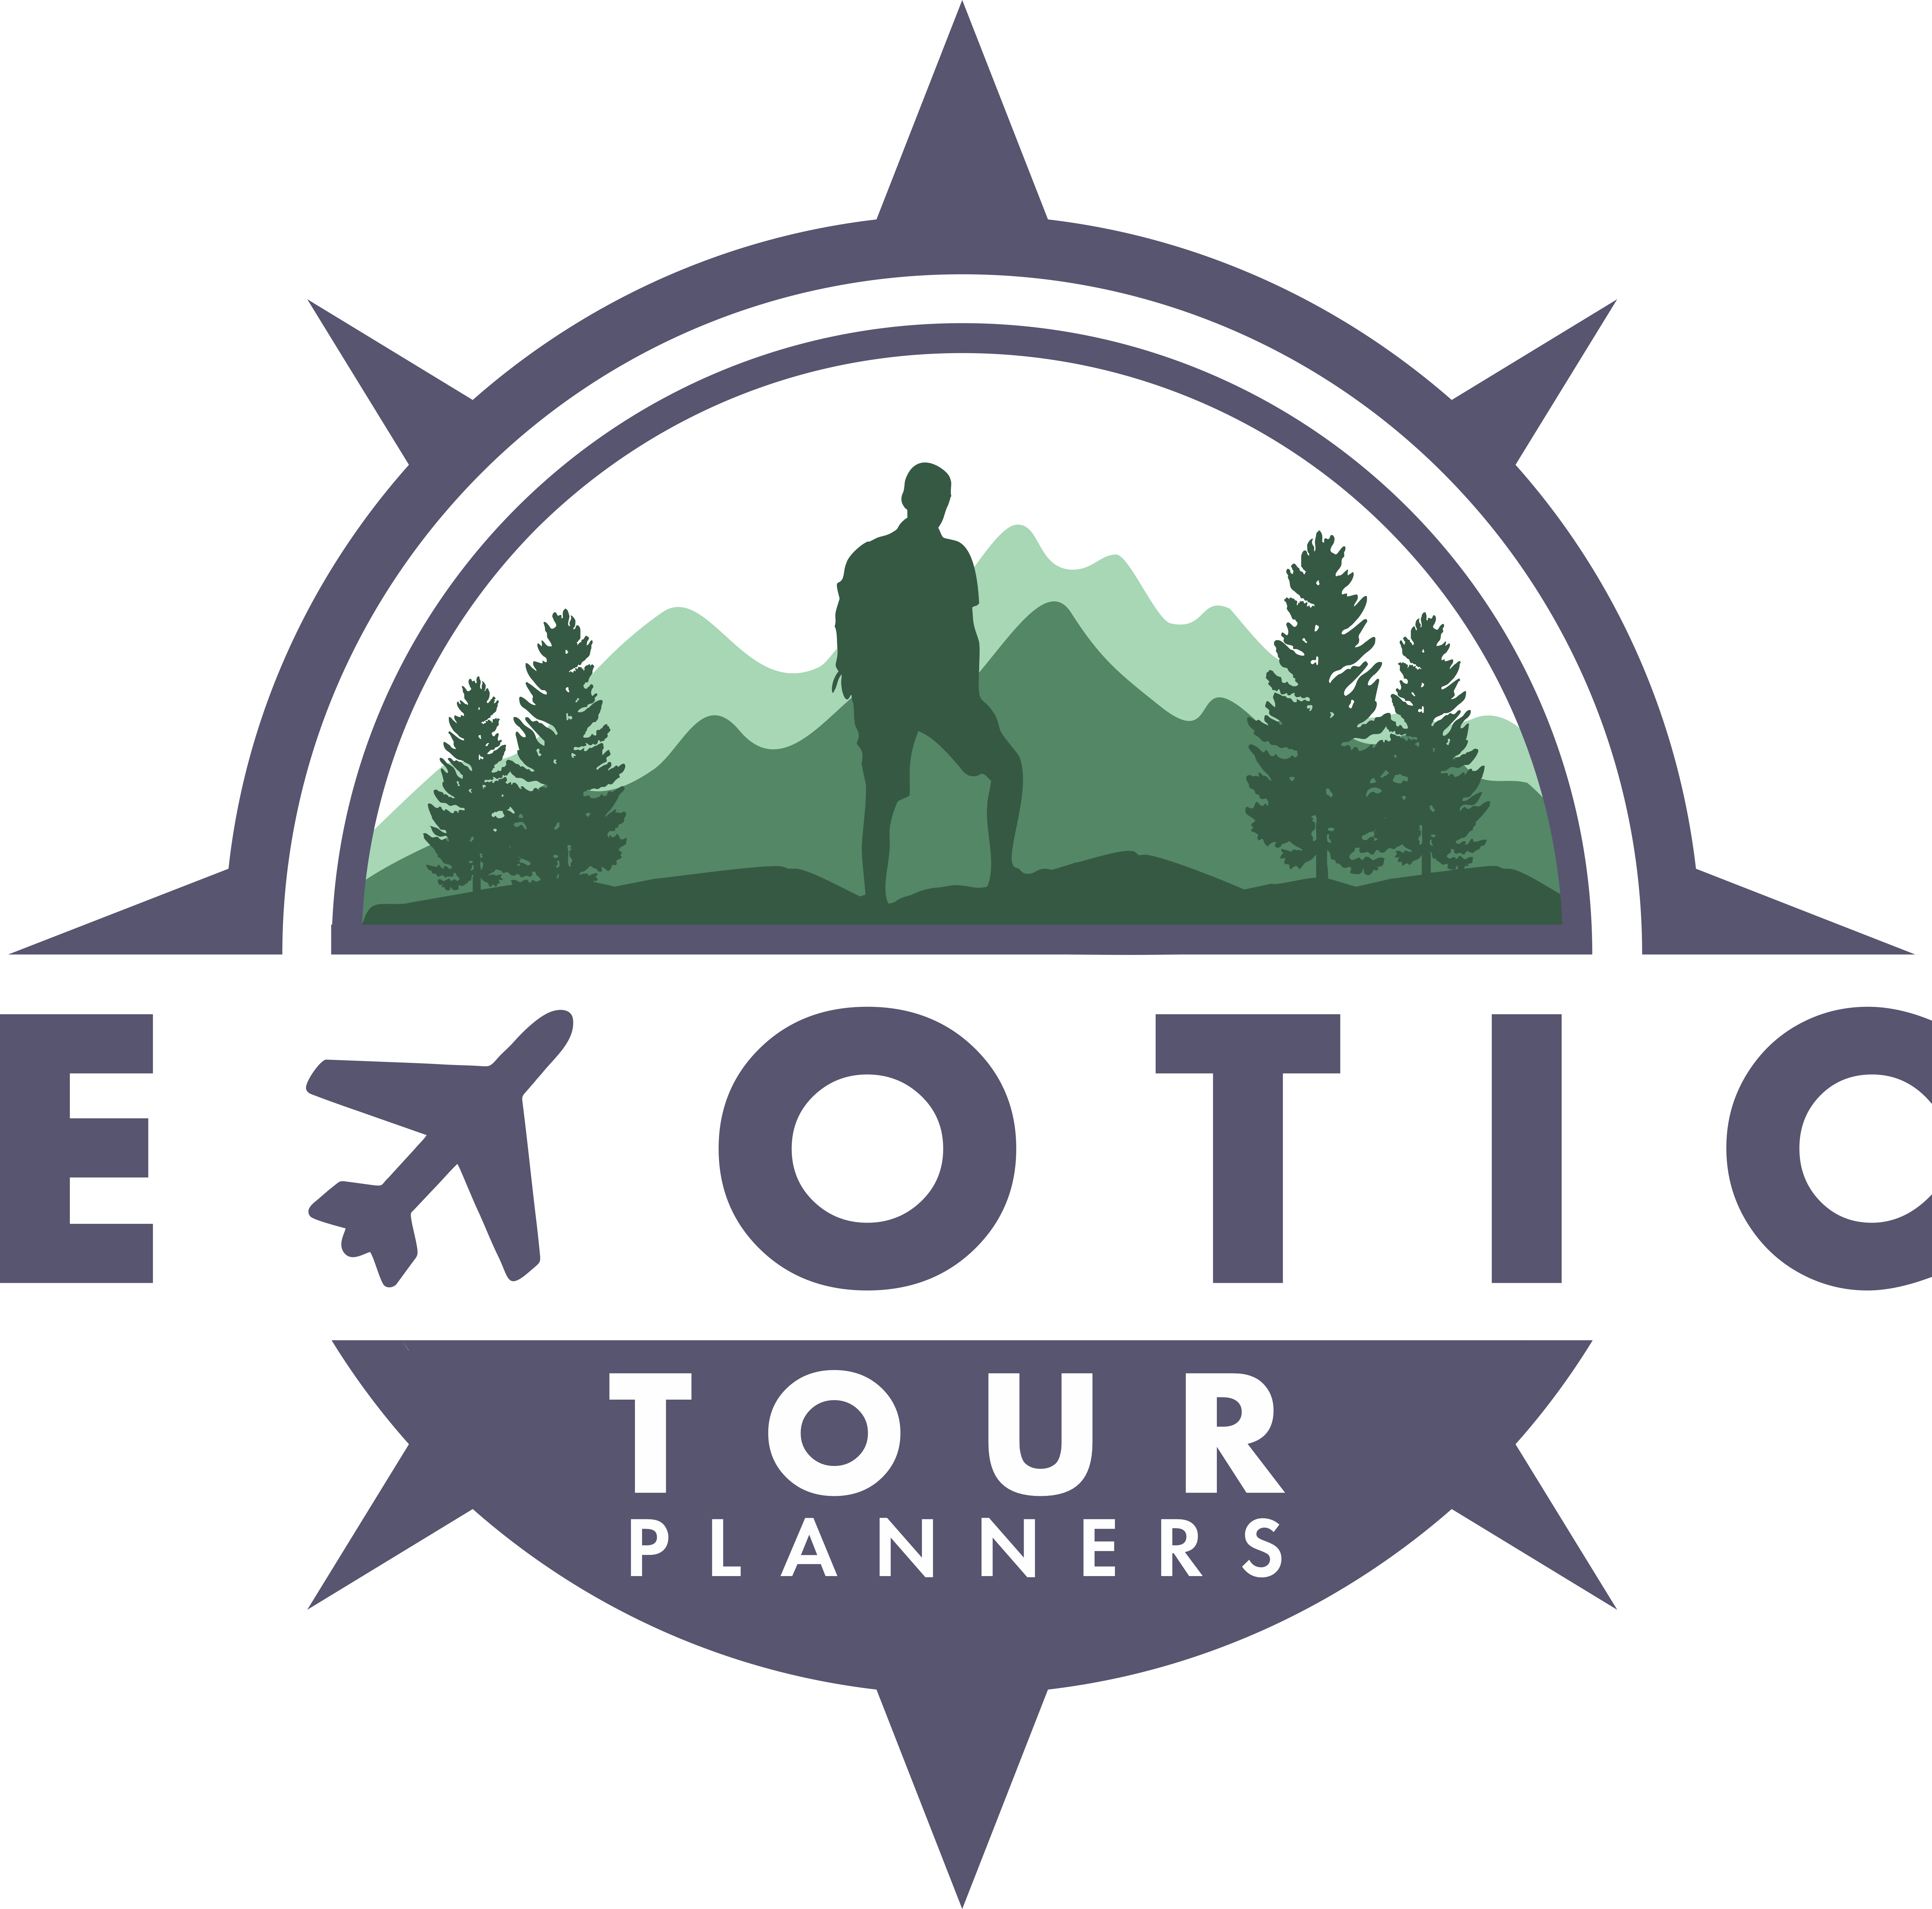 Exotic Tour Planners